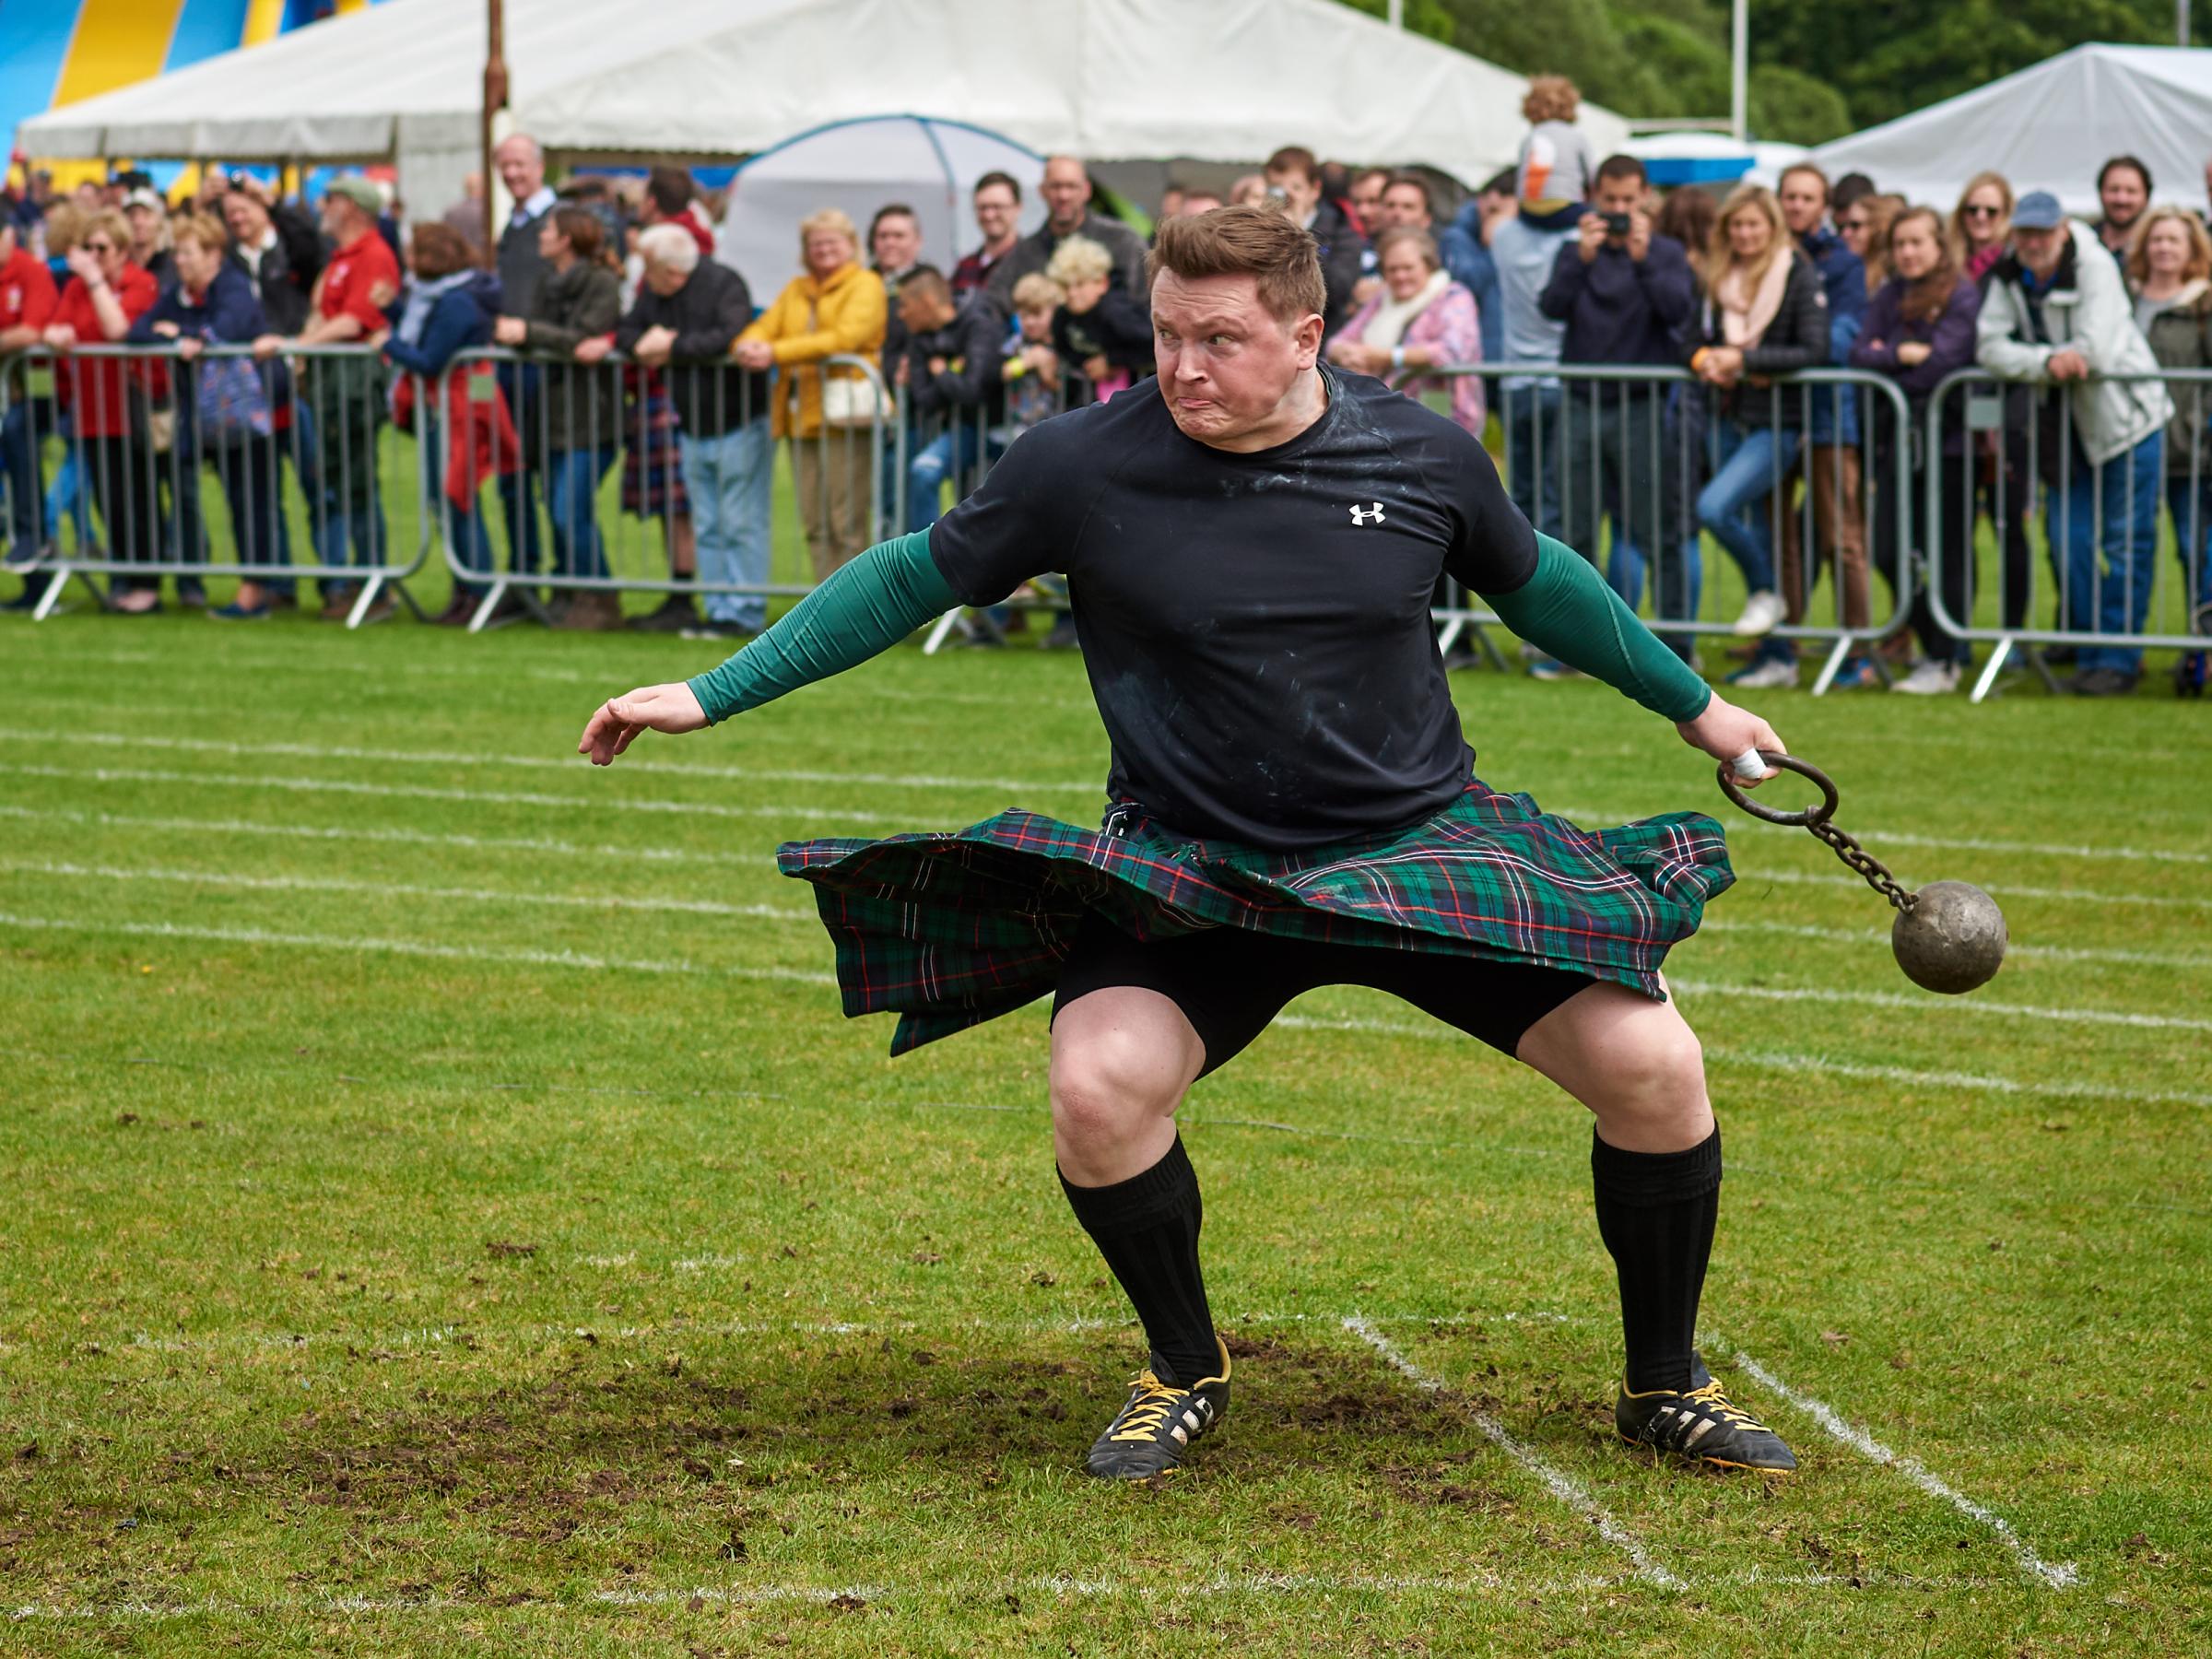 The Helensburgh and Rosneath Highland Games events have been cancelled amid ongoing doubt about Covid-19 restrictions